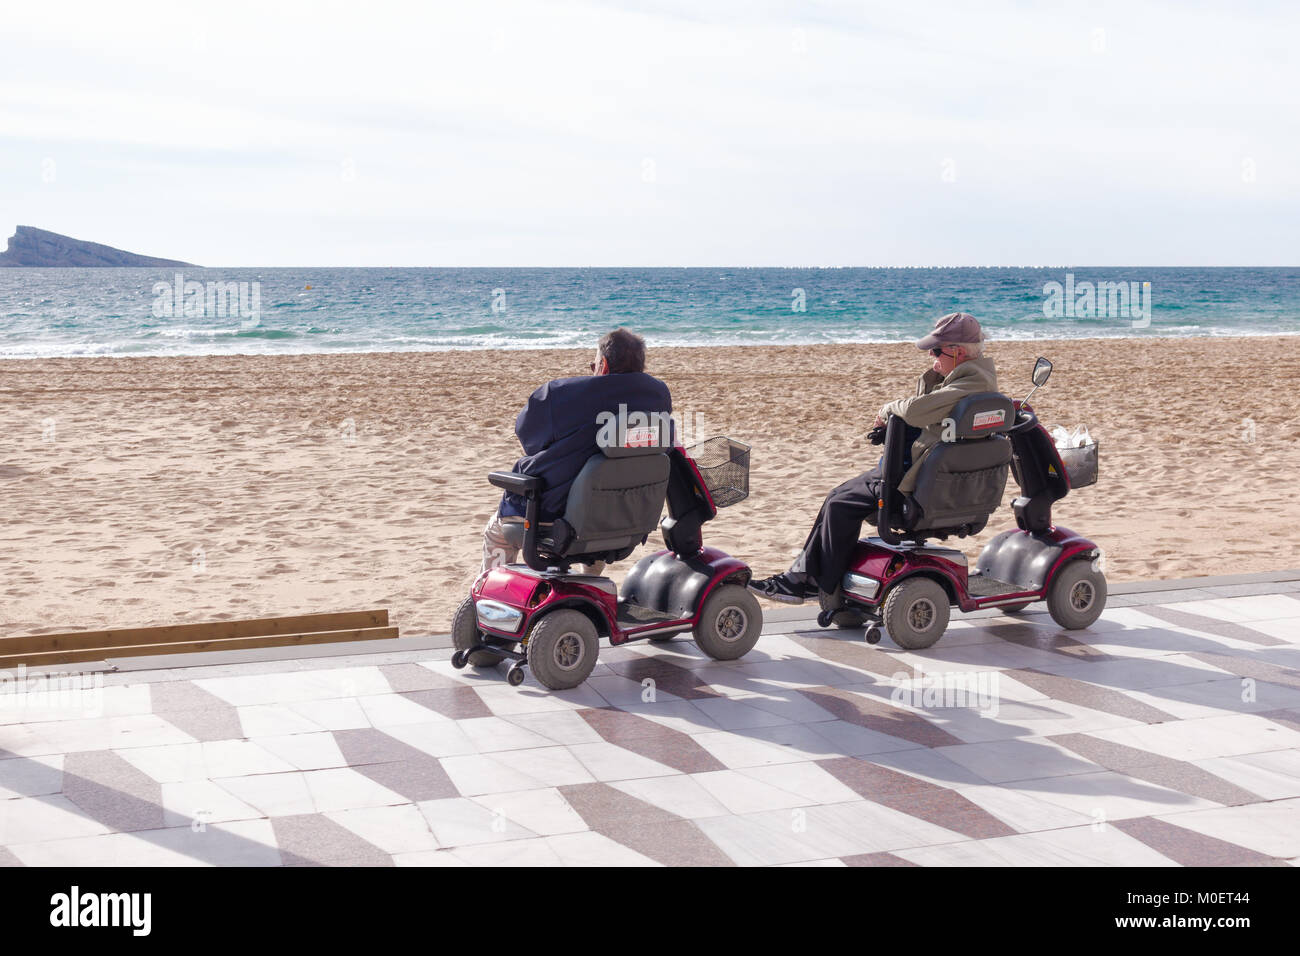 Benidorm, Spain - January 14, 2018: Seniors on mobility scooters looking to the sea in Benidorm, Spain Stock Photo